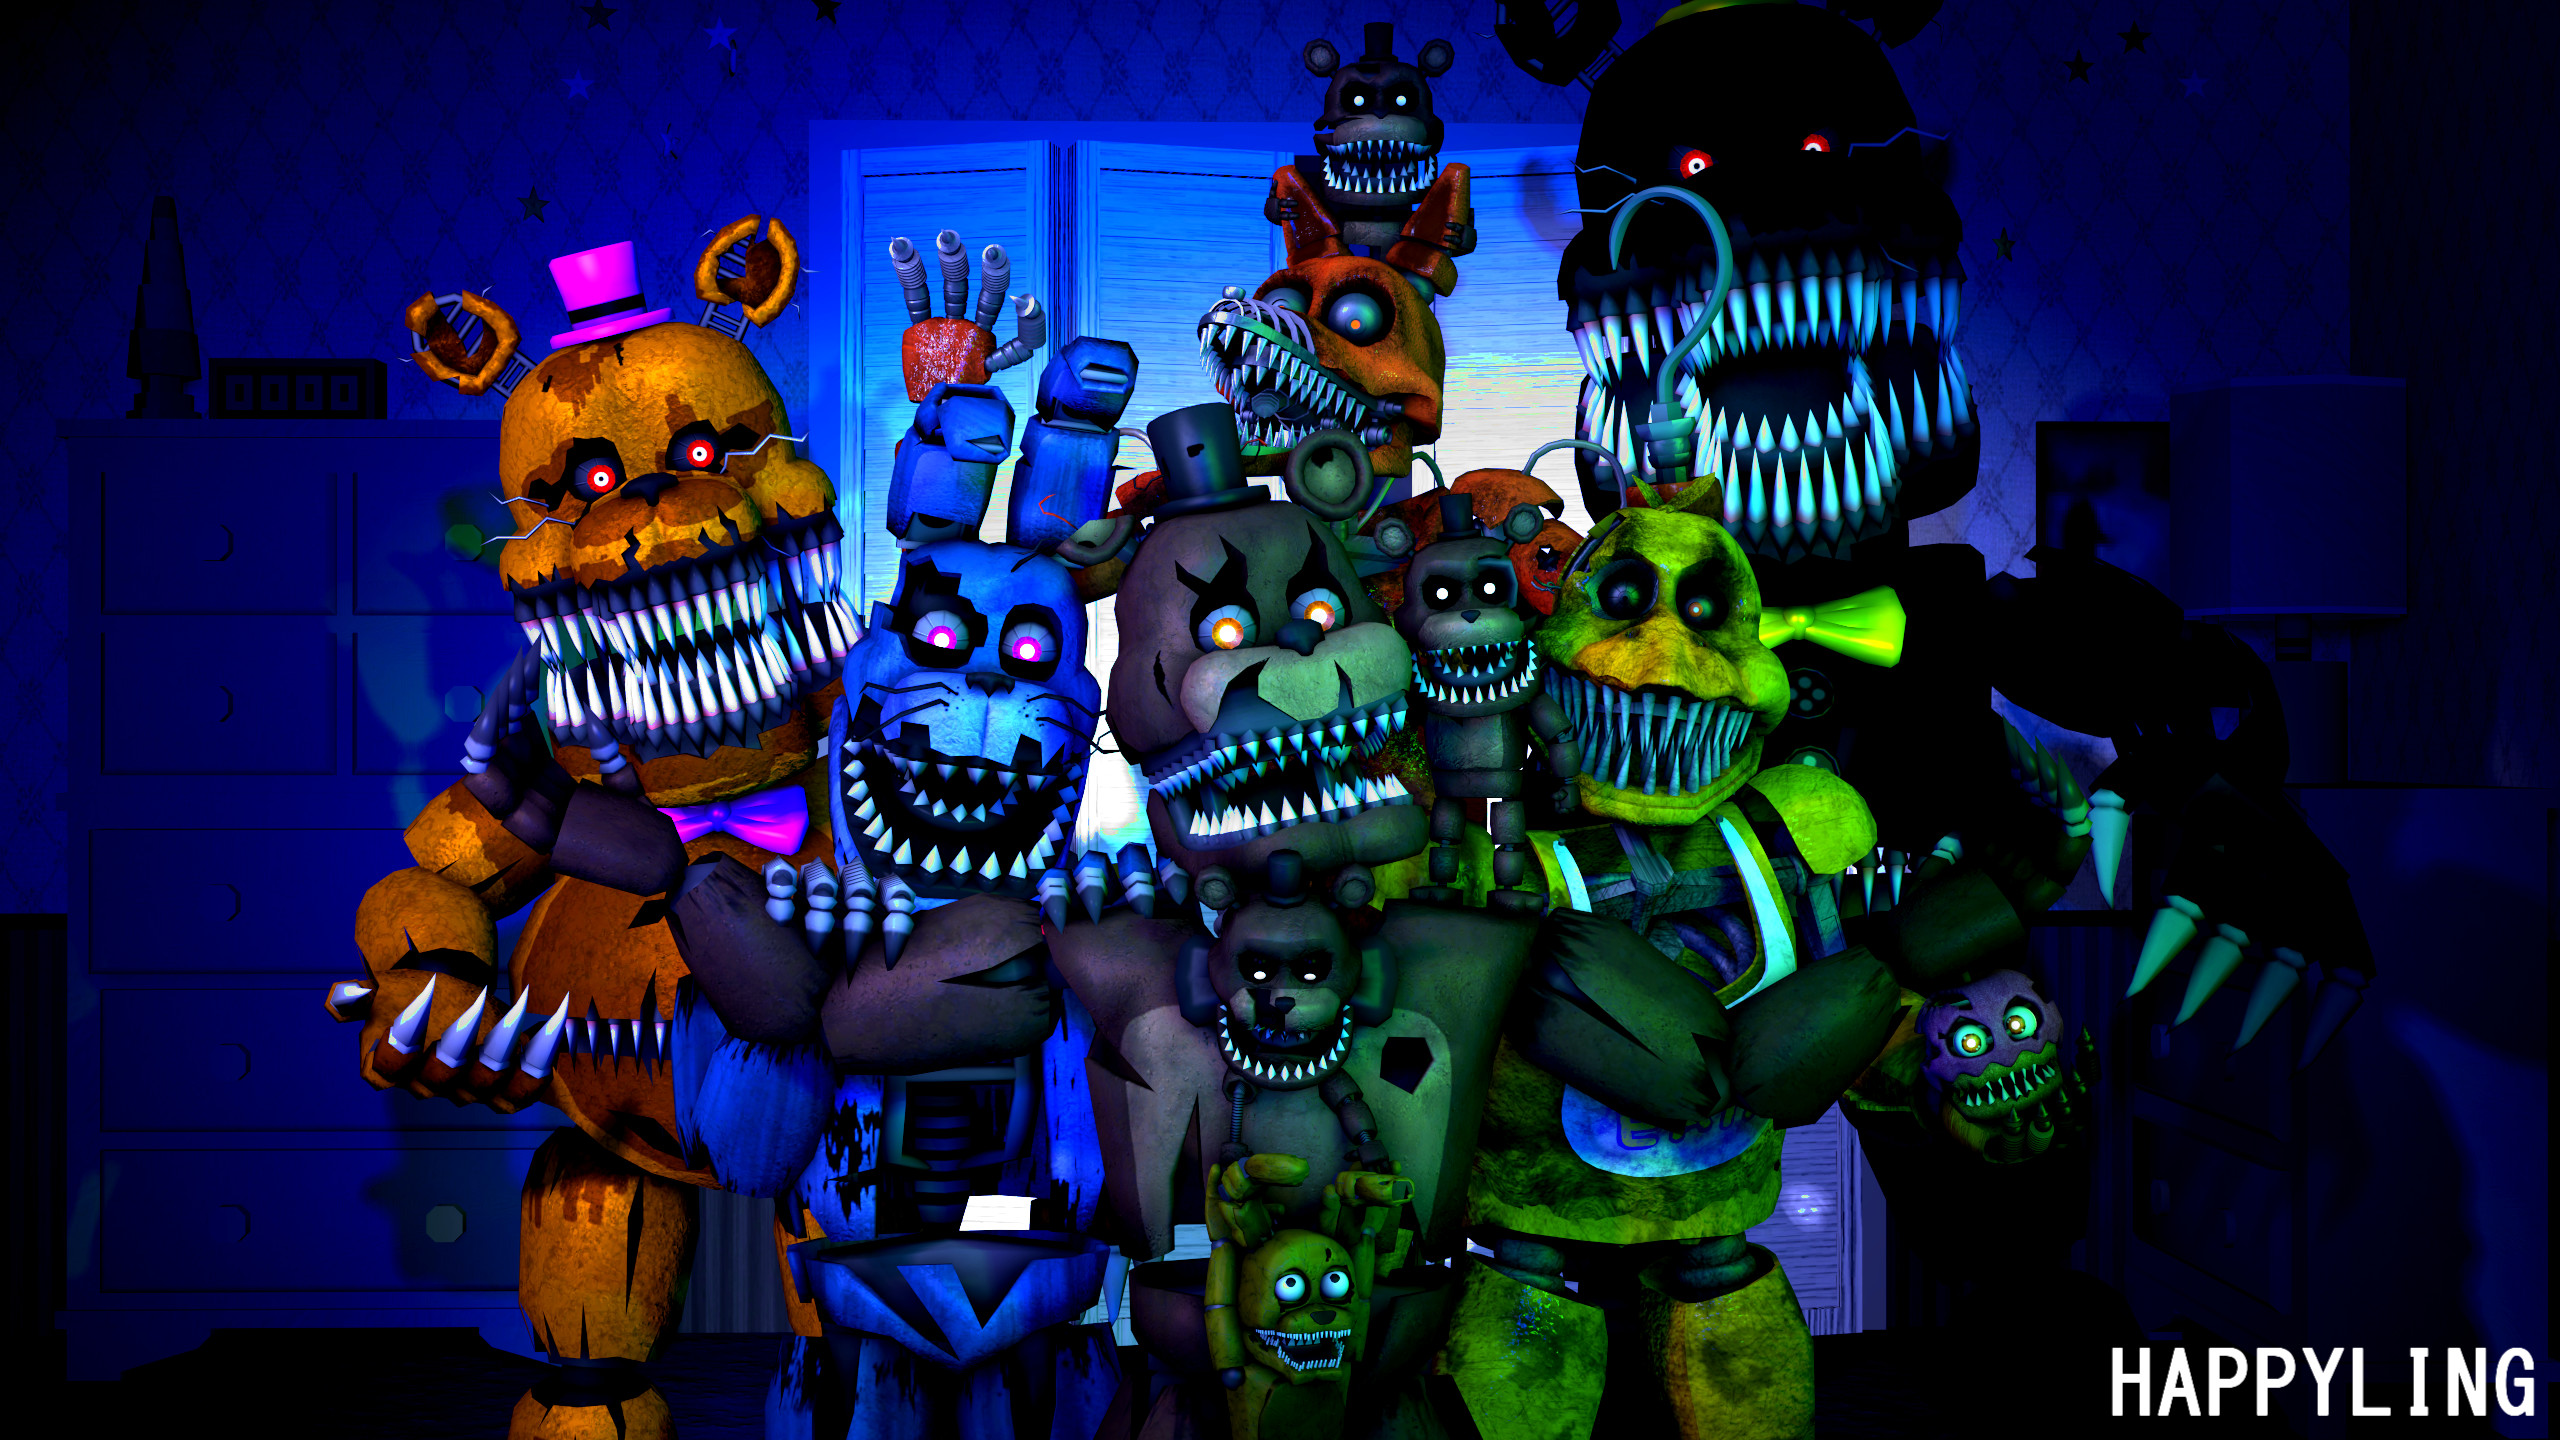 five nights at freddy's wallpaper,action figure,toy,fictional character,fiction,games